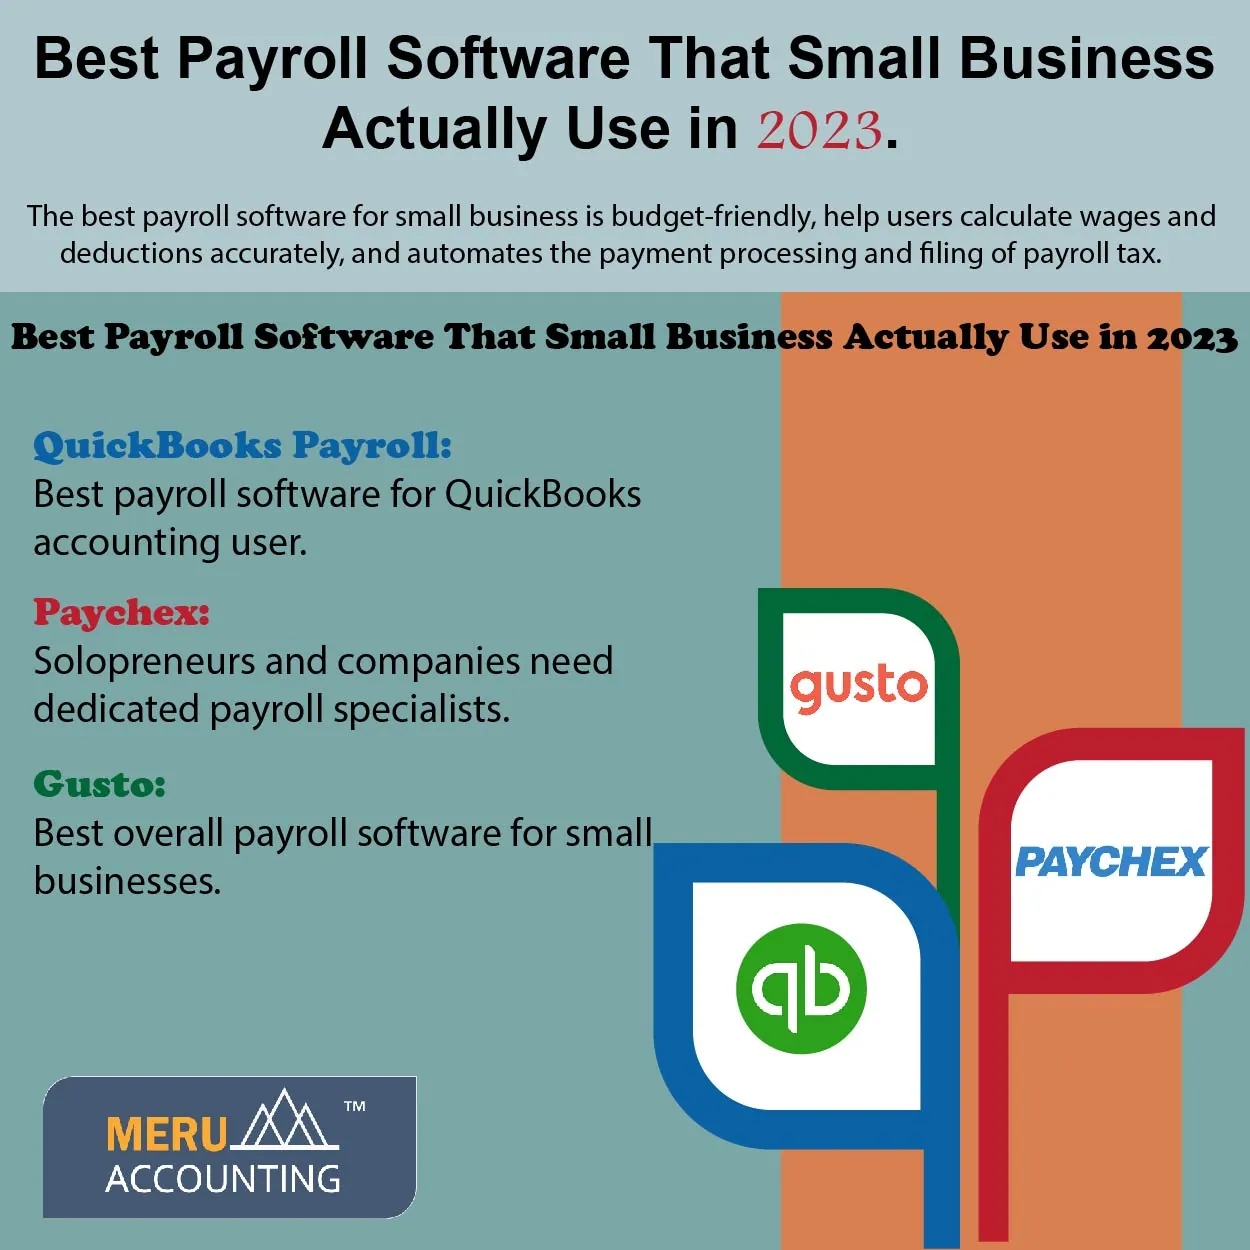 best payroll software>
<br>


<ol>
	<li>QuickBooks Payroll.</li>
	<li>Paychex Flex.</li>
	<li>Gusto.</li>
</ol>

<p>QuickBooks Payroll is the <strong>Best Payroll Software</strong> for most QuickBooks accounting users. It seamlessly integrates, providing access within the same system with a few clicks.</p>

<h3>Features of QuickBooks Payroll</h3>

<ul>
	<li>Automate and unlimited payroll: With QBs Payroll, you can approve and run payroll for unlimited times automatically </li>
	<li>Automated payroll tax: It takes care of tax calculation, filings and payments, and year-end reporting. However, the <a  data-cke-saved-href=